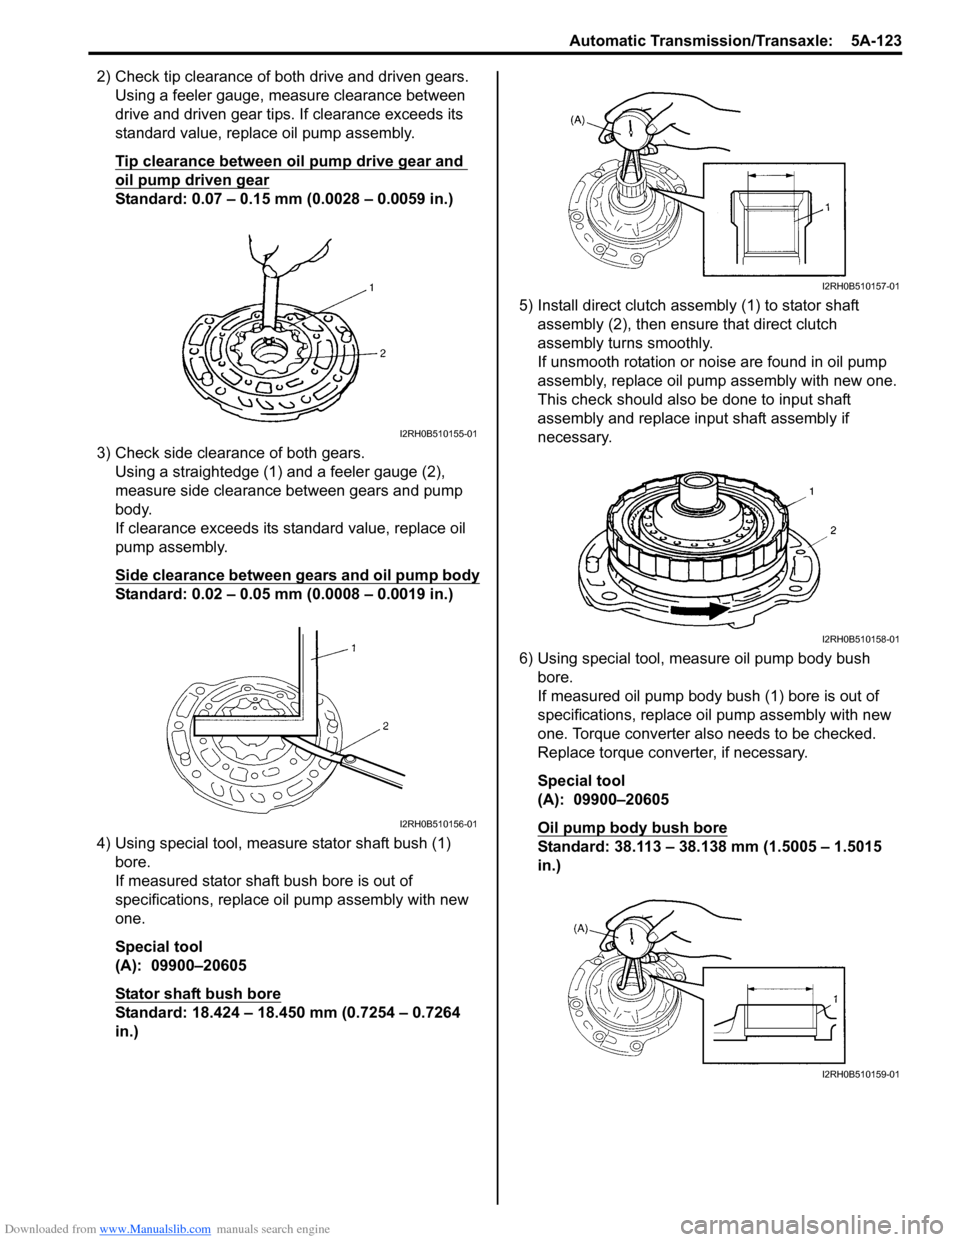 SUZUKI SWIFT 2006 2.G Service Manual PDF Downloaded from www.Manualslib.com manuals search engine Automatic Transmission/Transaxle:  5A-123
2) Check tip clearance of both drive and driven gears.Using a feeler gauge, m easure clearance betwee